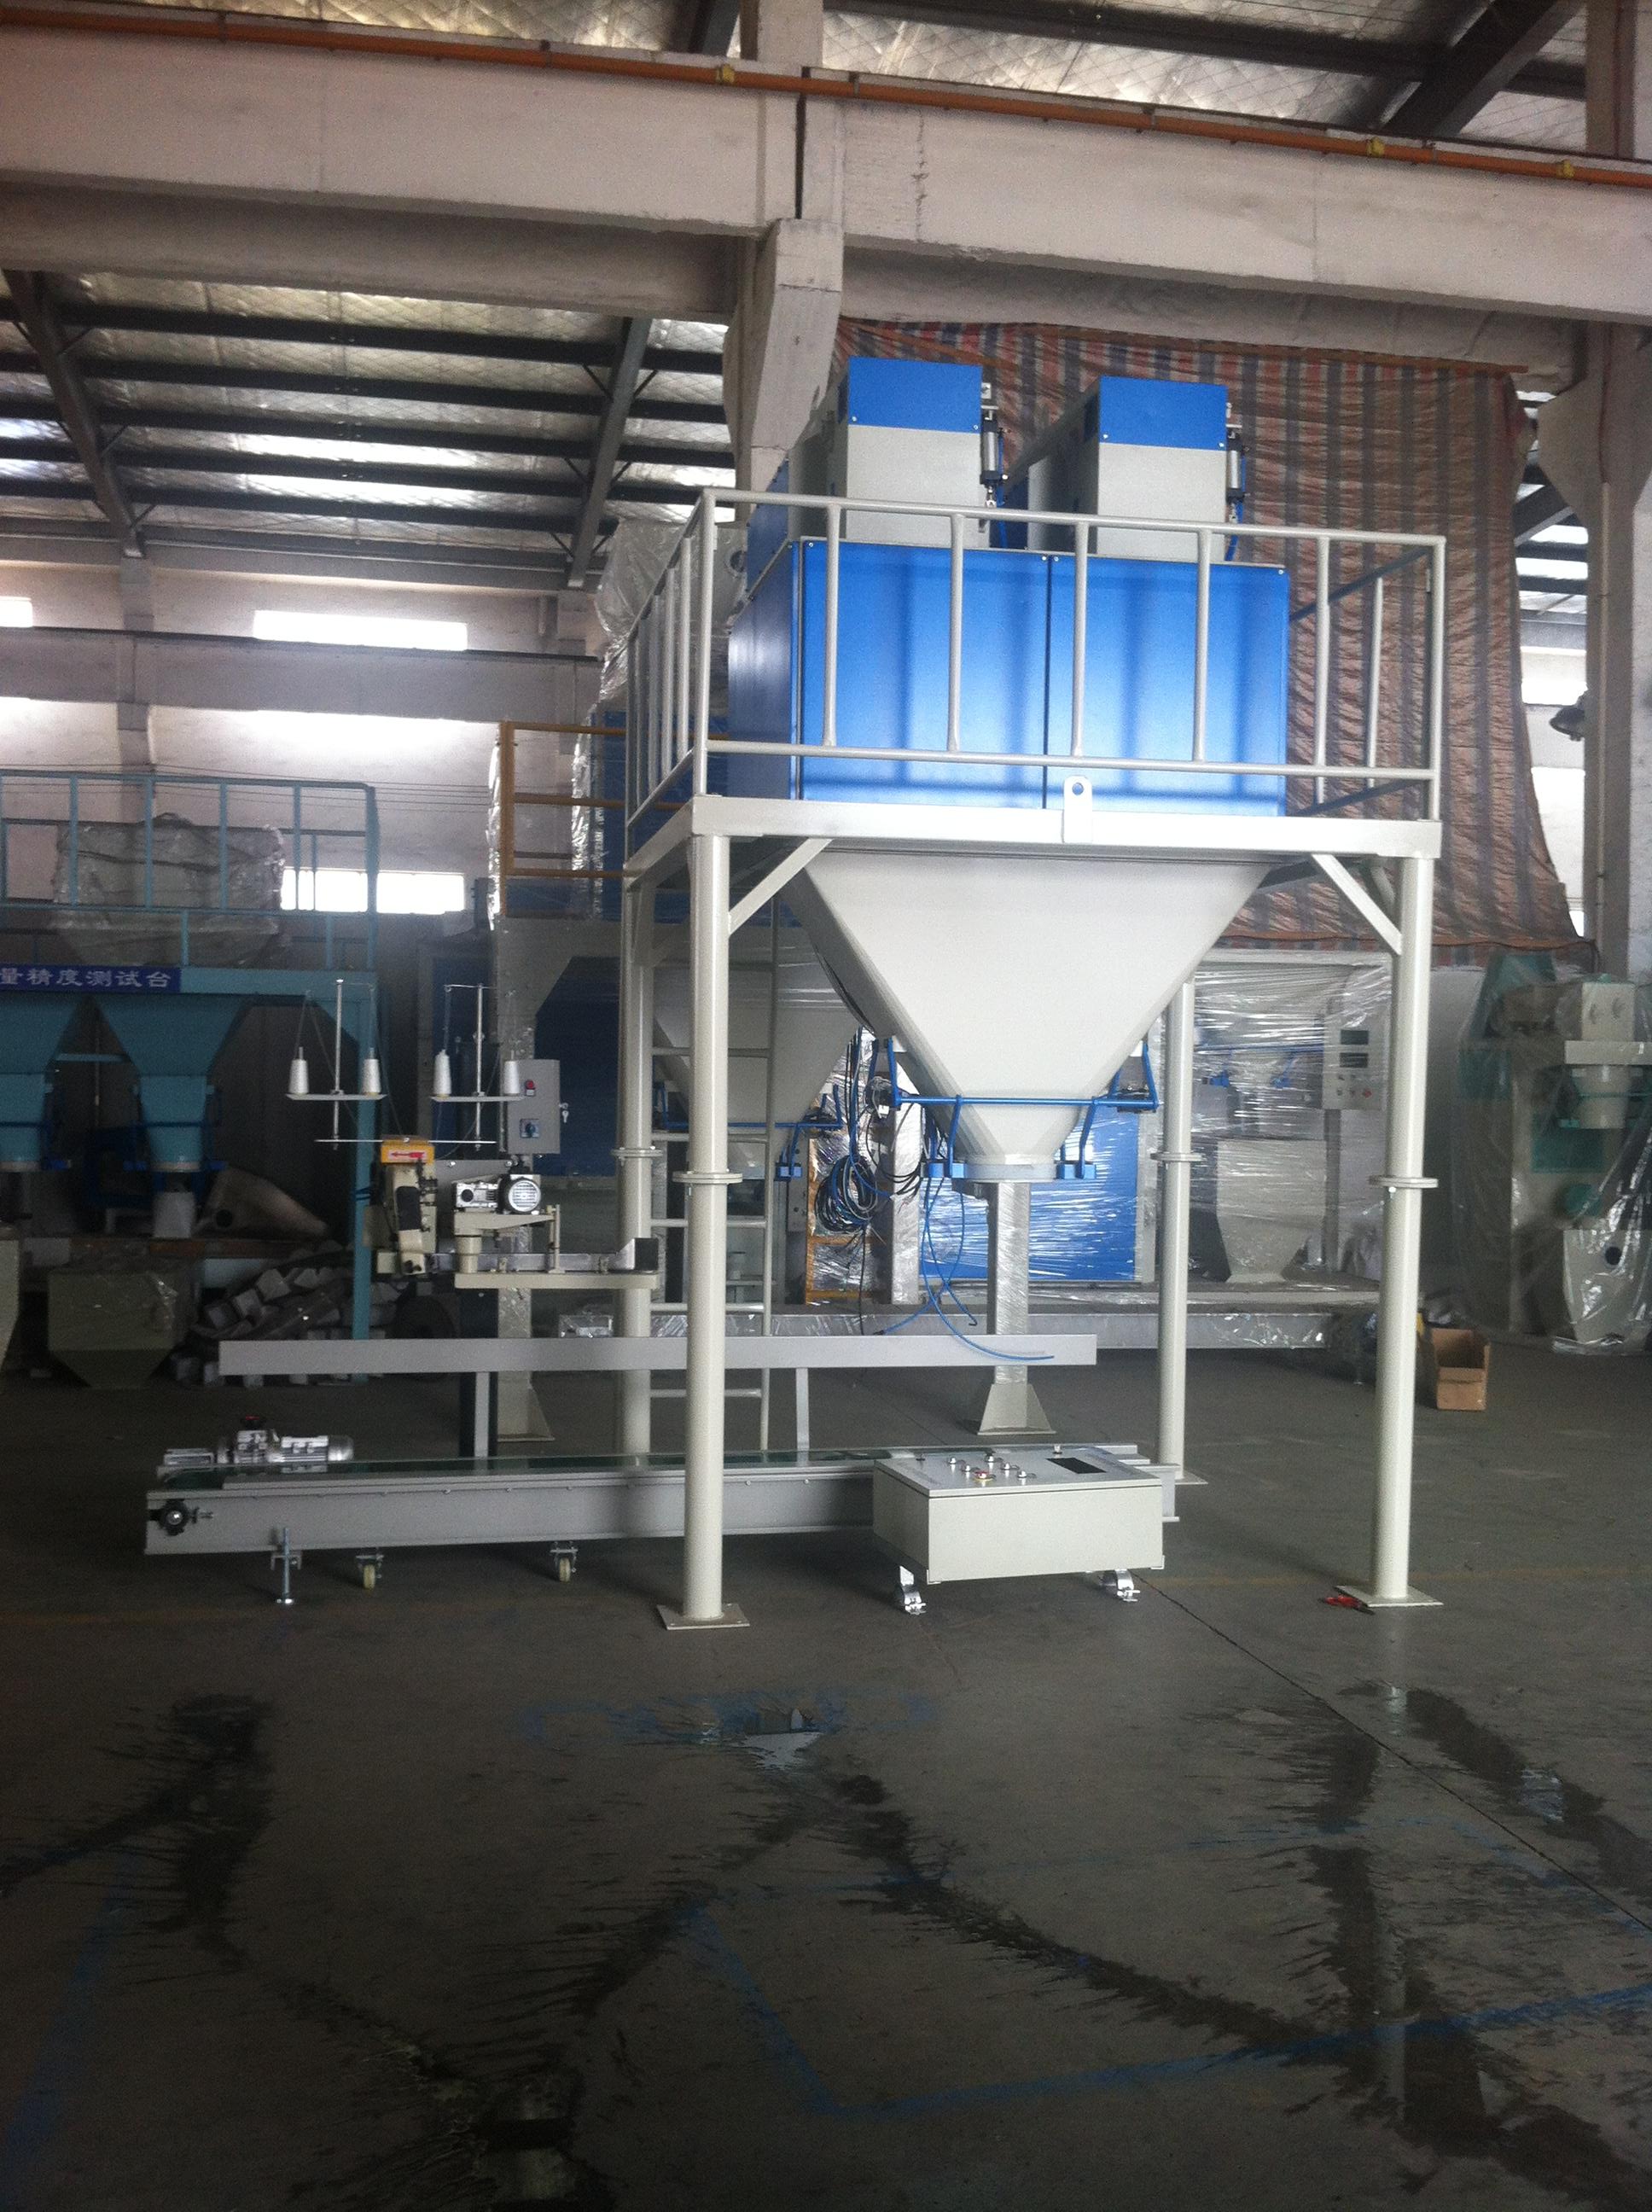 Supply of a Compost Bagging Line High-level Palletizing Line Dry Hydrated Lime Bagging Machine complete automatic bagging, palletising and wrapping line 25kg Valve Bag Packing Machine 1000kg Jumbo Bag